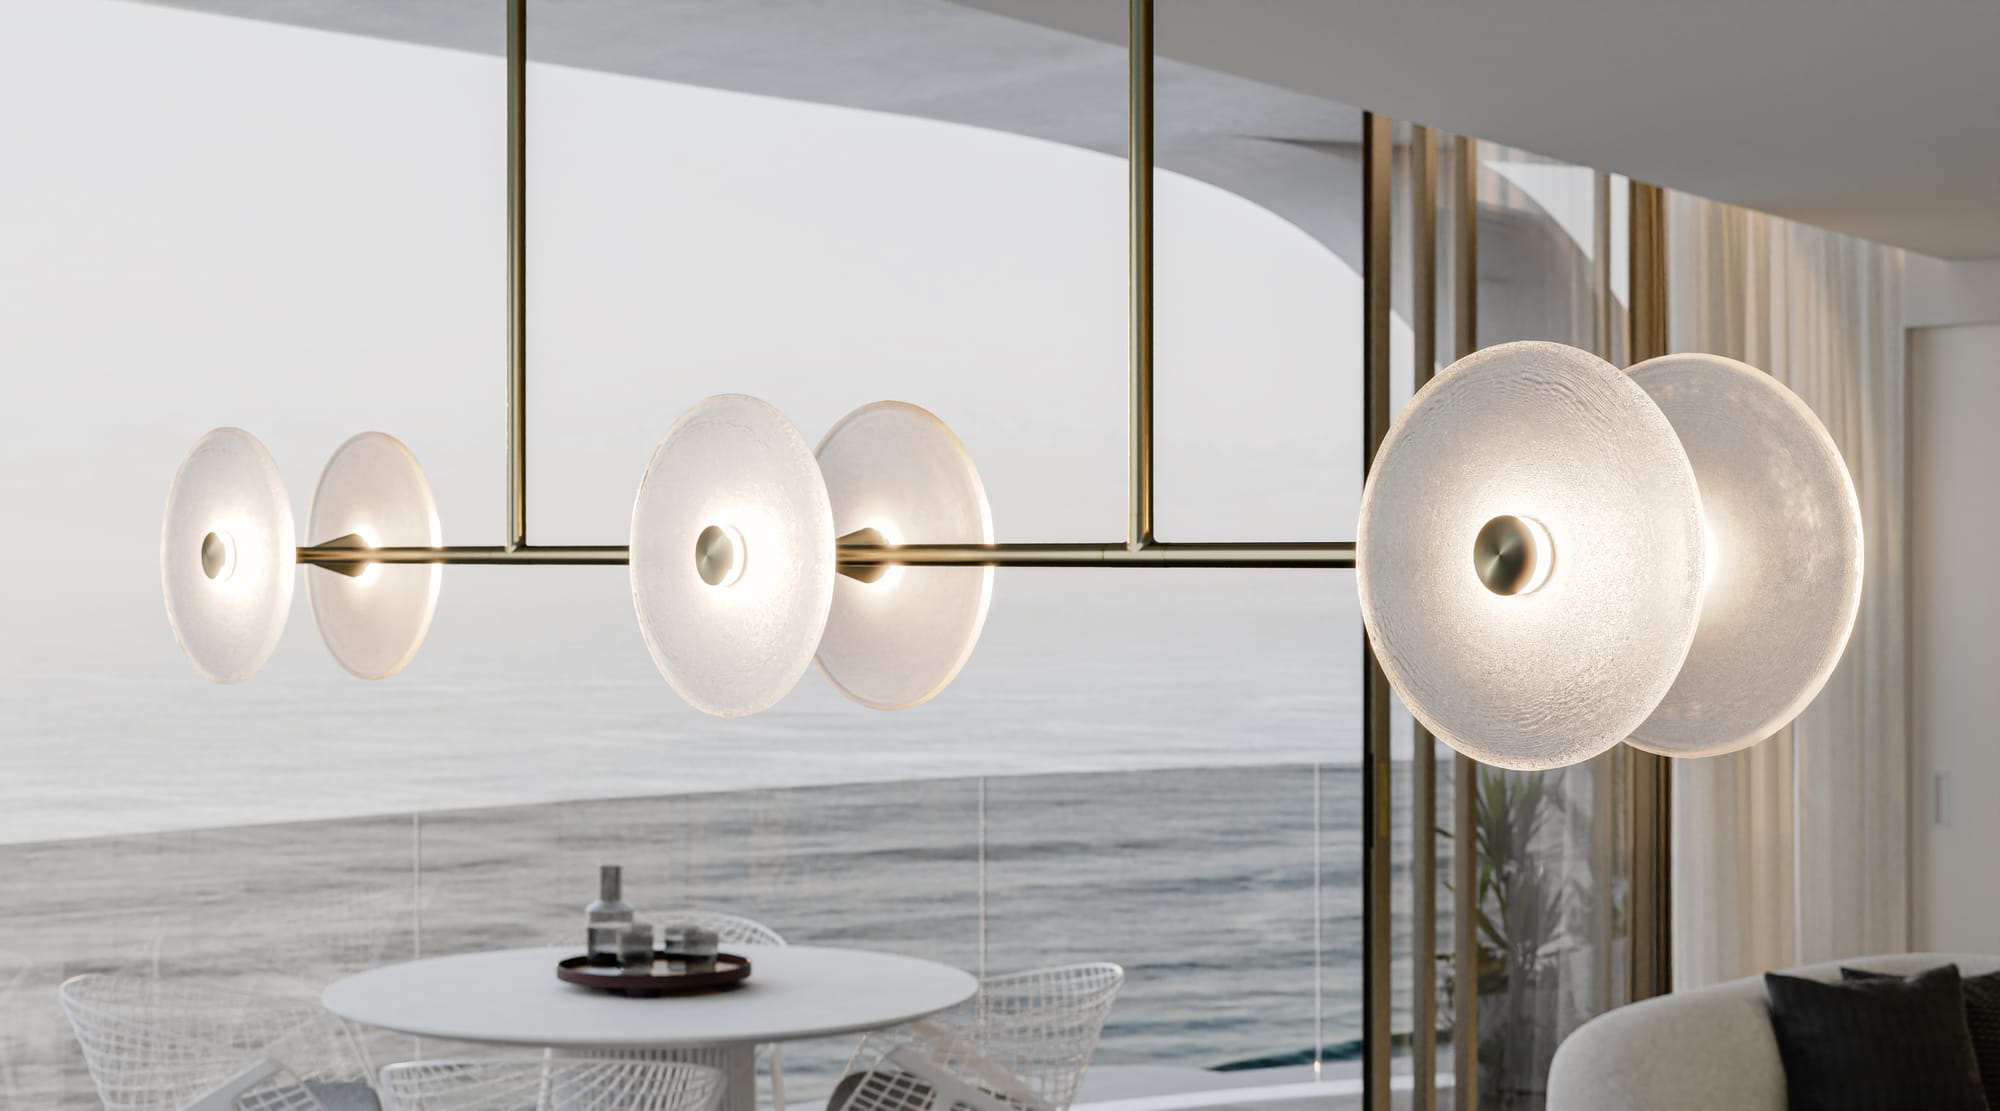 Coral Linear Road 6 Pendant Light by SOKTAS. Copyright of SOKTAS. Close up of gold and glass pendant light with 6 individual glass discs. 